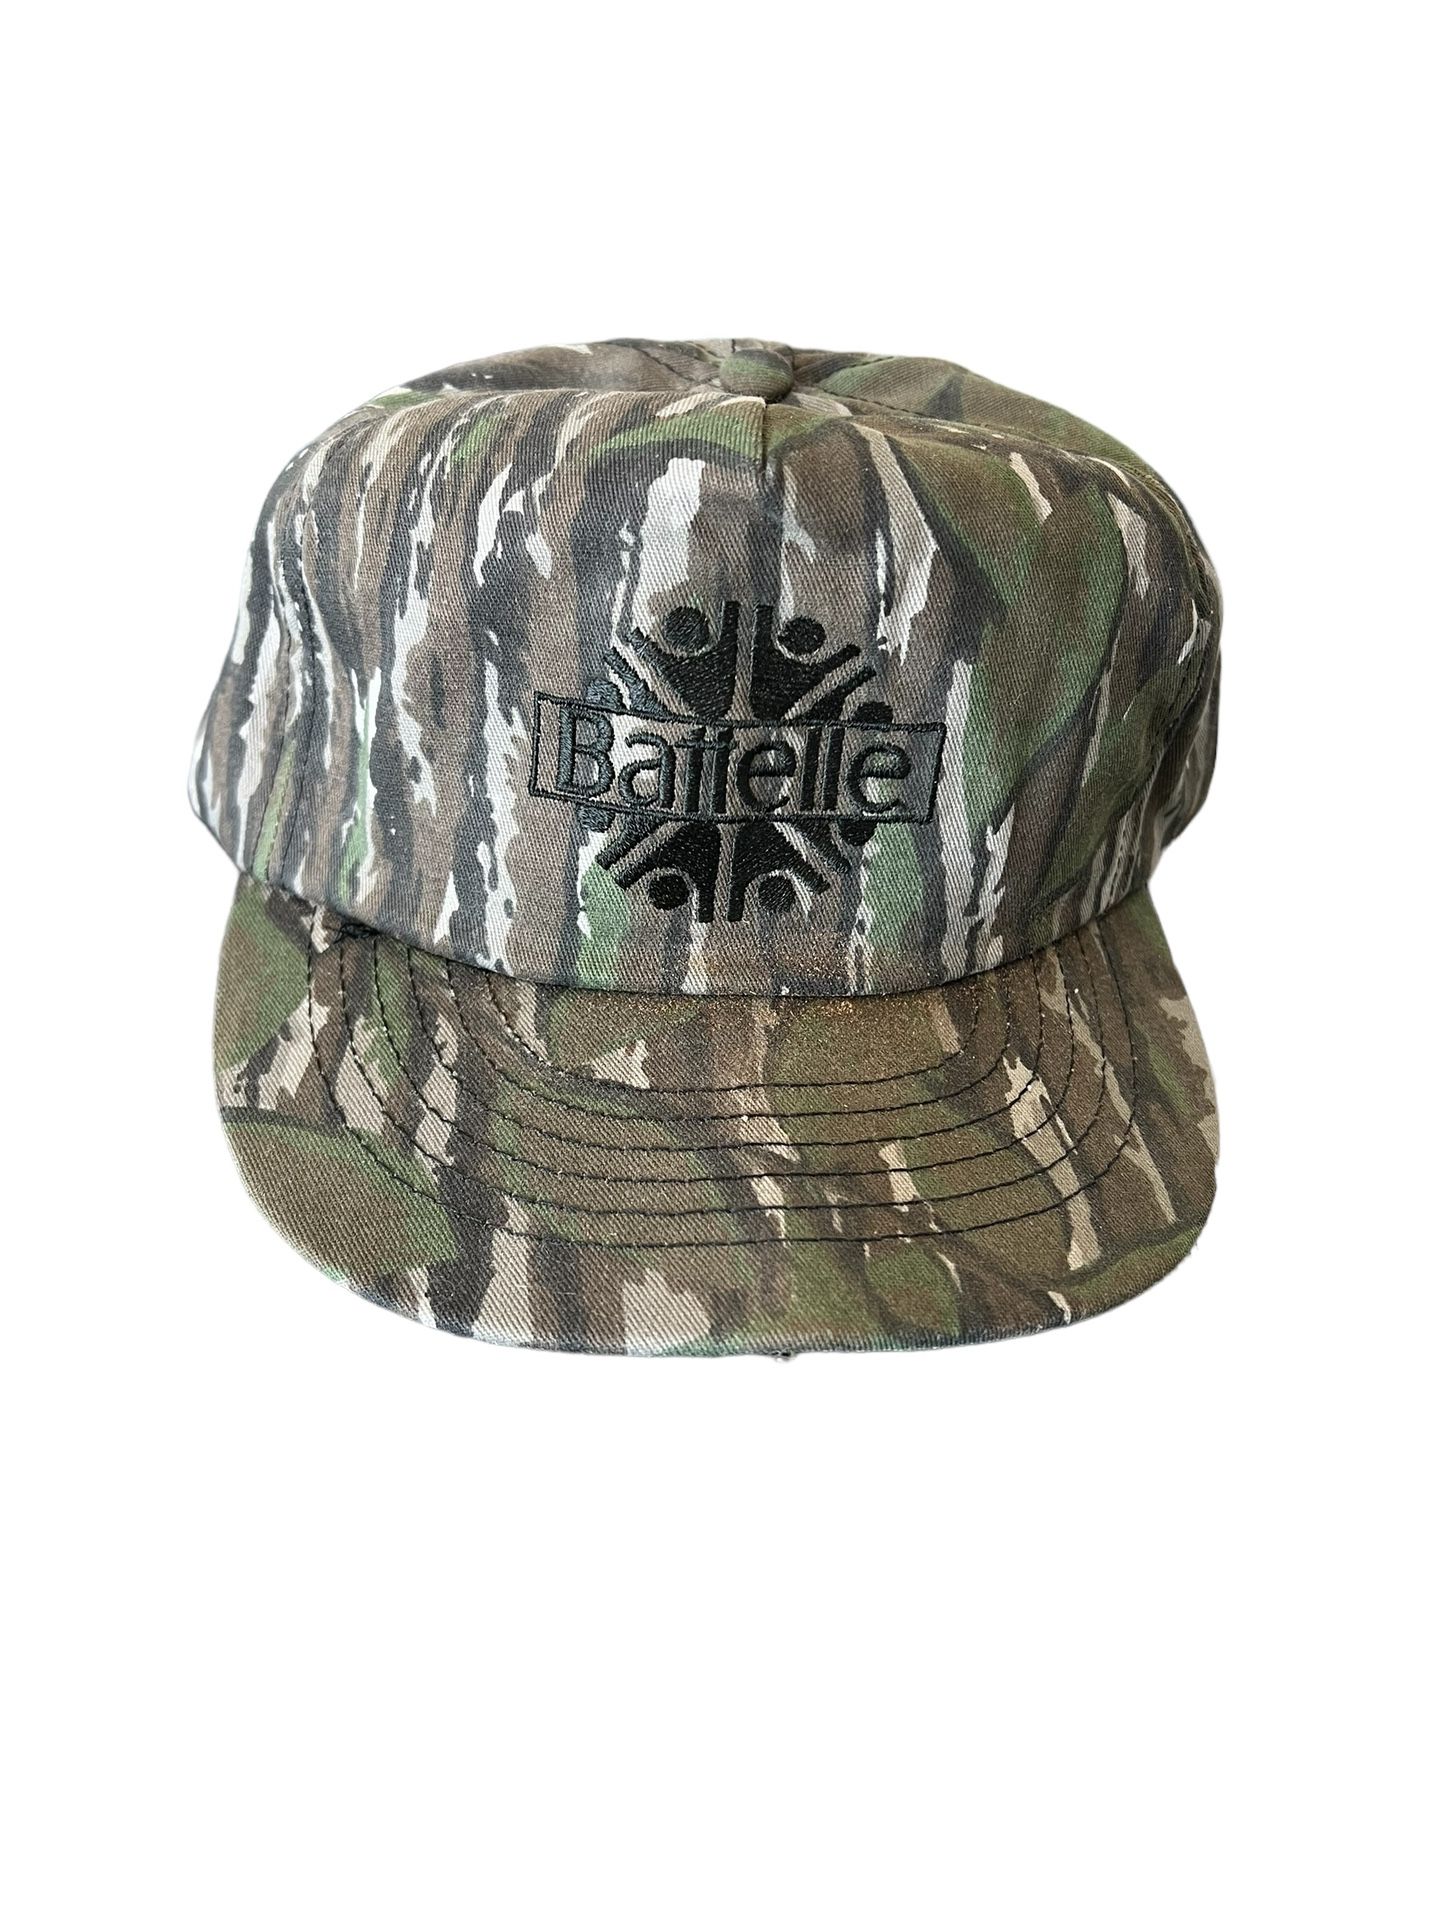 Camo Advantage Timber Snapback Hat Camouflage Hunting Cap Battelle  This Camo Advantage Timber Snapback Hat is the perfect addition to any hunting out